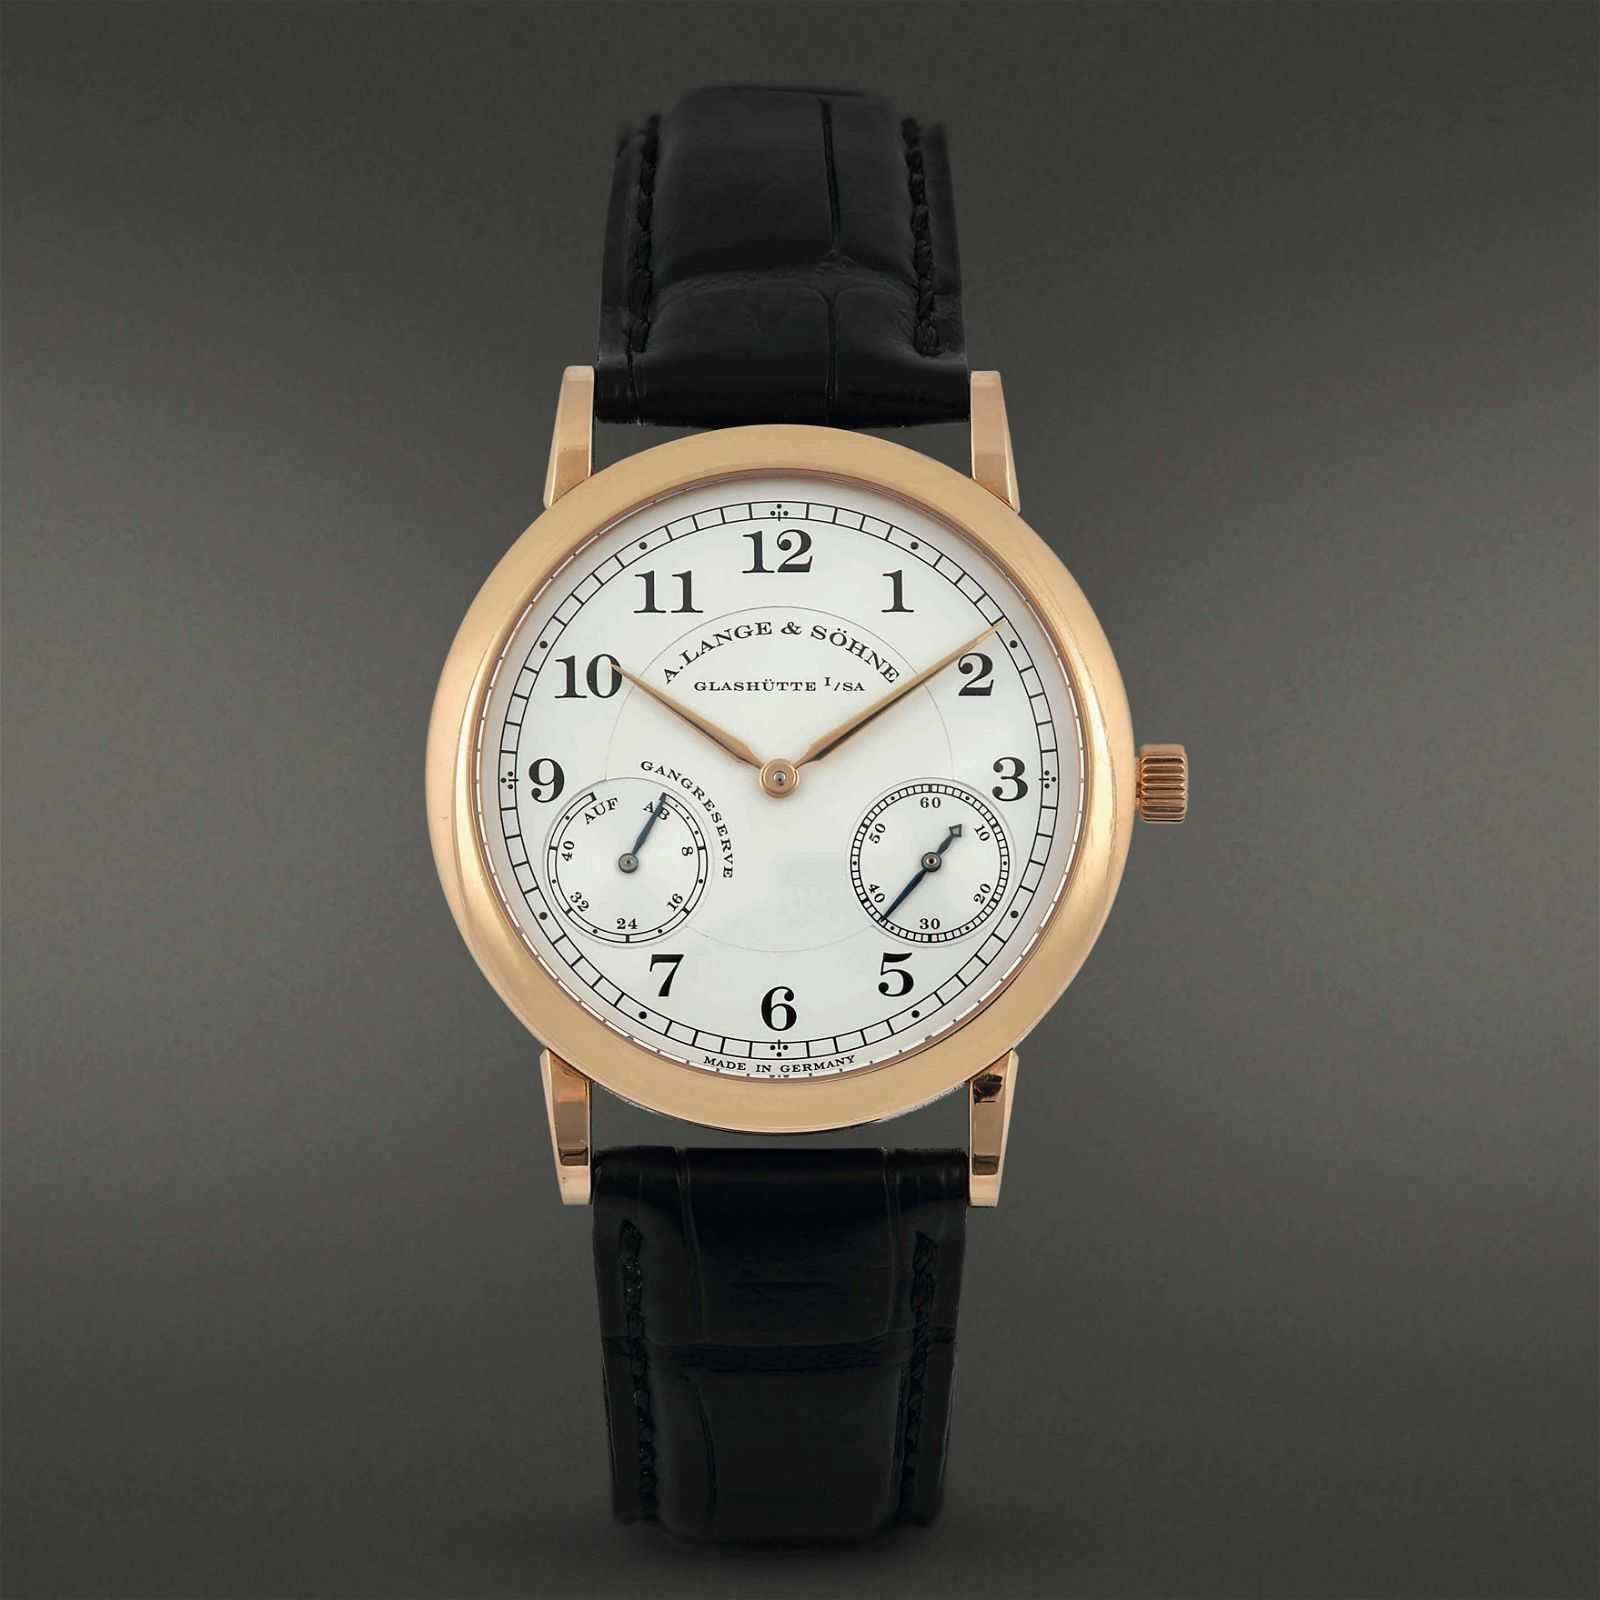 This circa-2000 A. Lange & Söhne 18K rose gold manually winding watch with a power reserve brought €15,000 ($16,065) in September 2022. Image courtesy of Cambi Casa D’Aste and LiveAuctioneers.